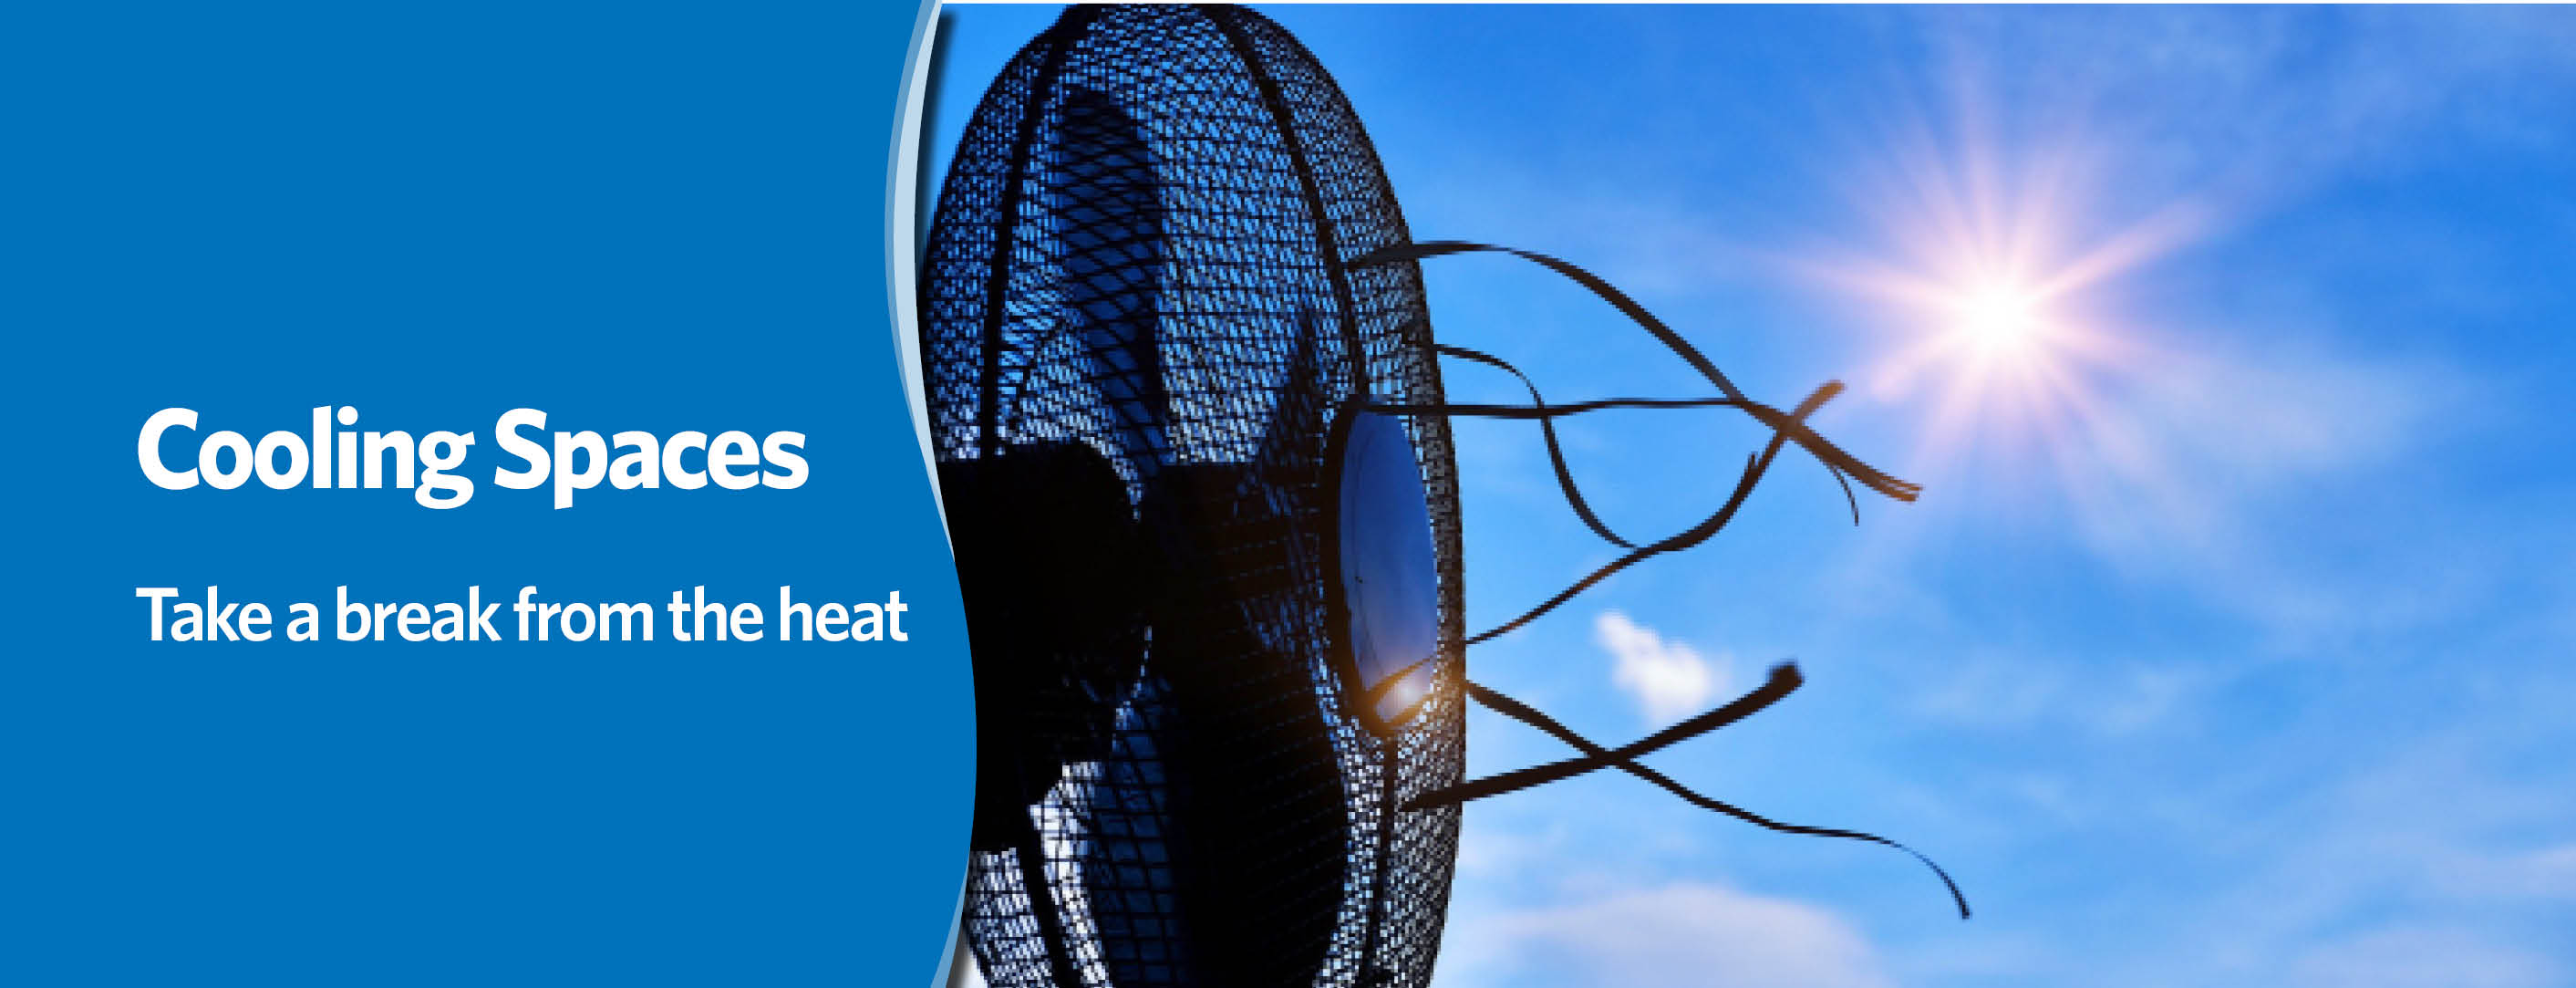 Heat warning: Learn about cooling spaces